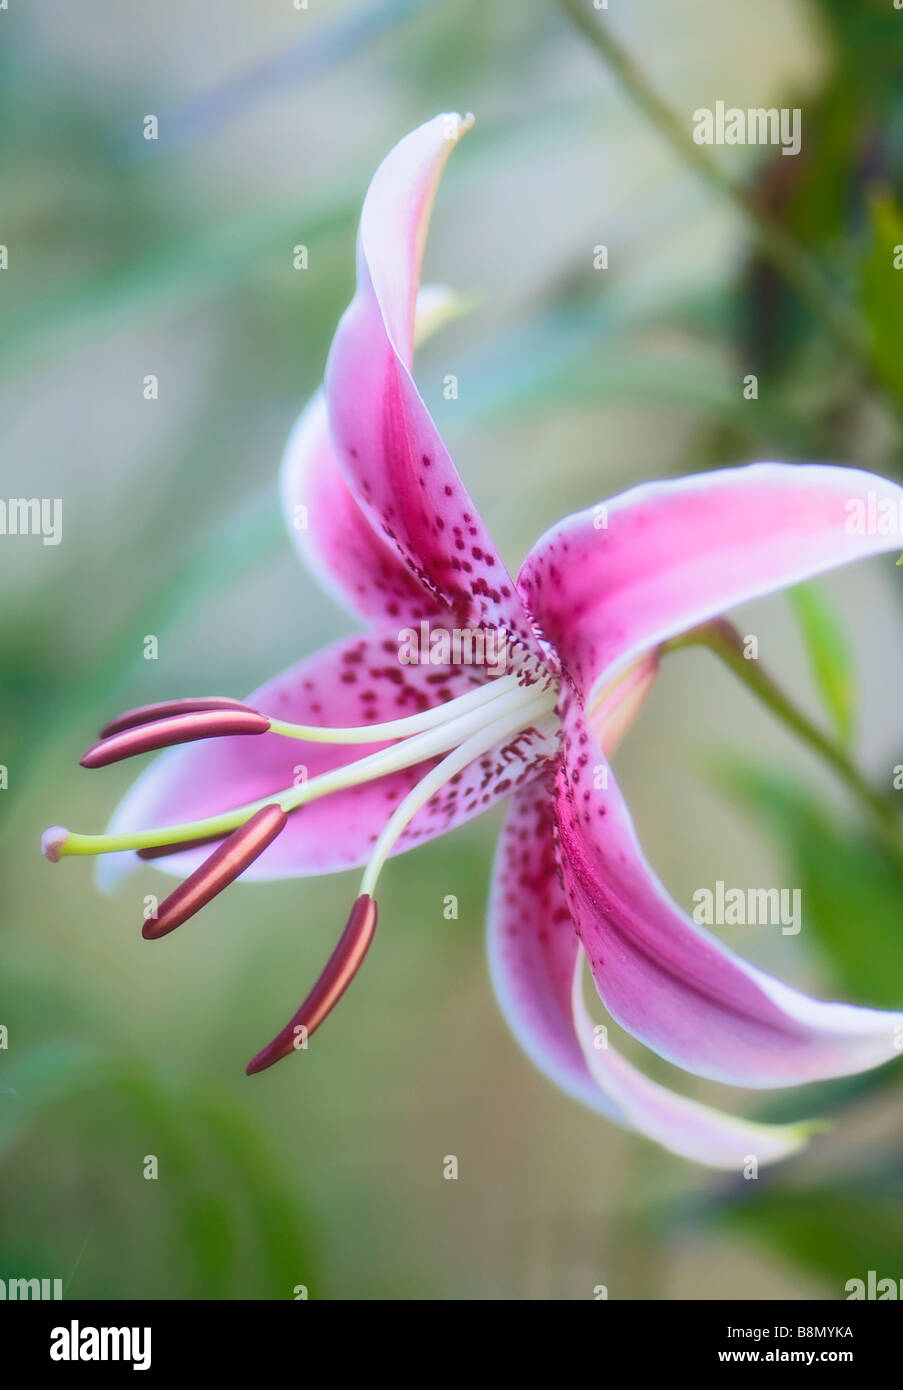 Pint Heirloom Oriental lily Flower Close-up Stock Photo